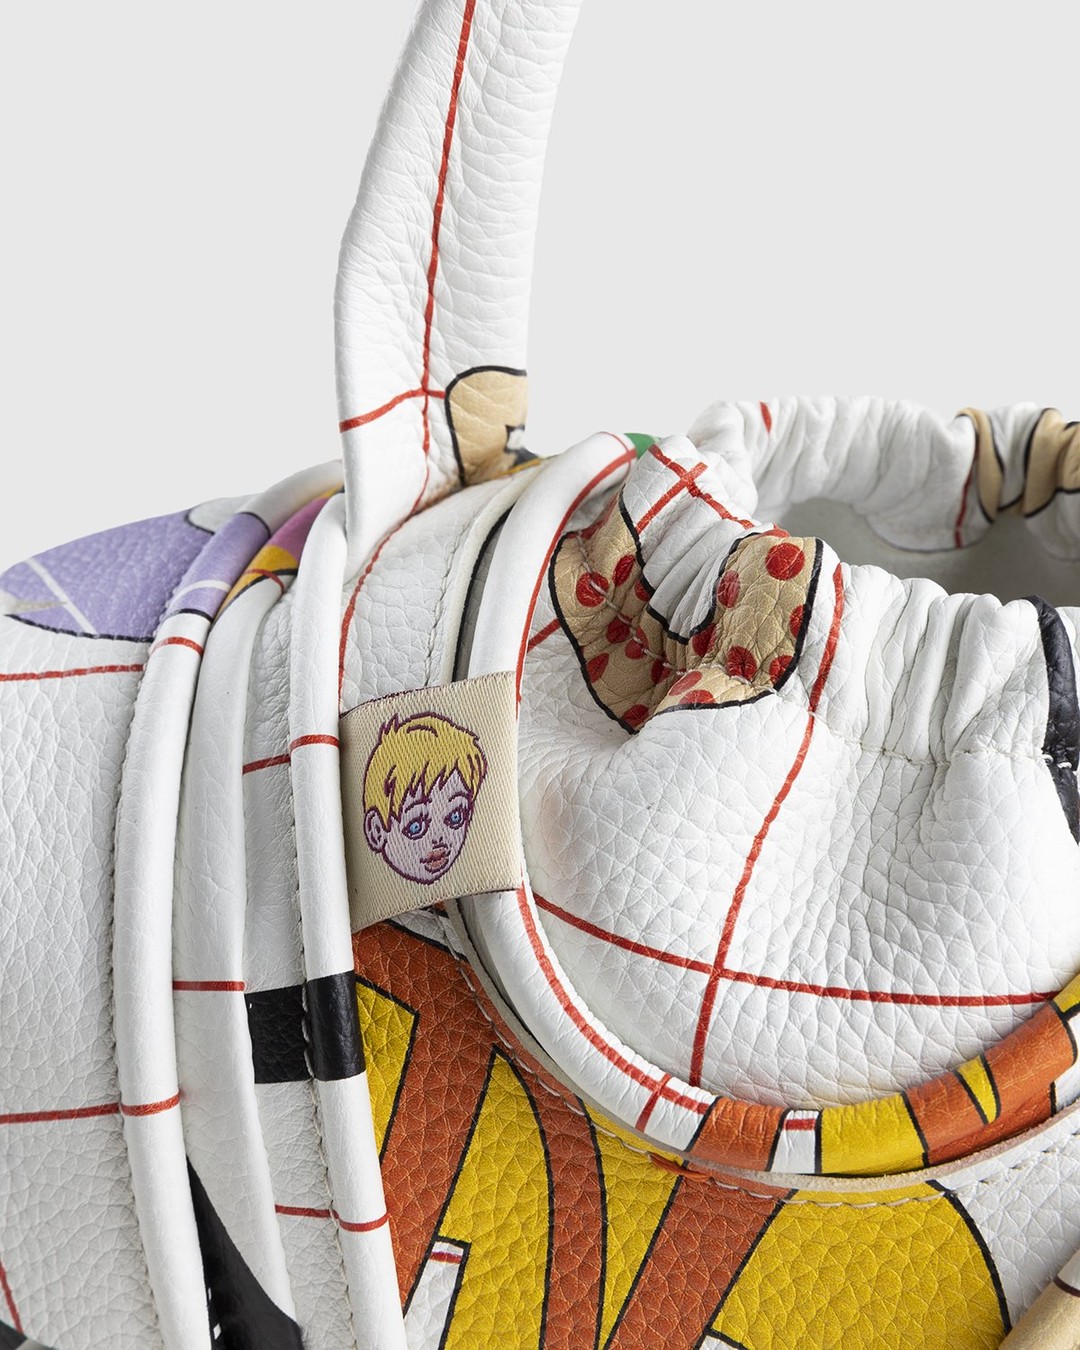 Nora Turato x Ecco Leather x Nicchi x Highsnobiety – Boomblaster Infinity Pool Dragon Toes Bag - Shoulder Bags - White - Image 6